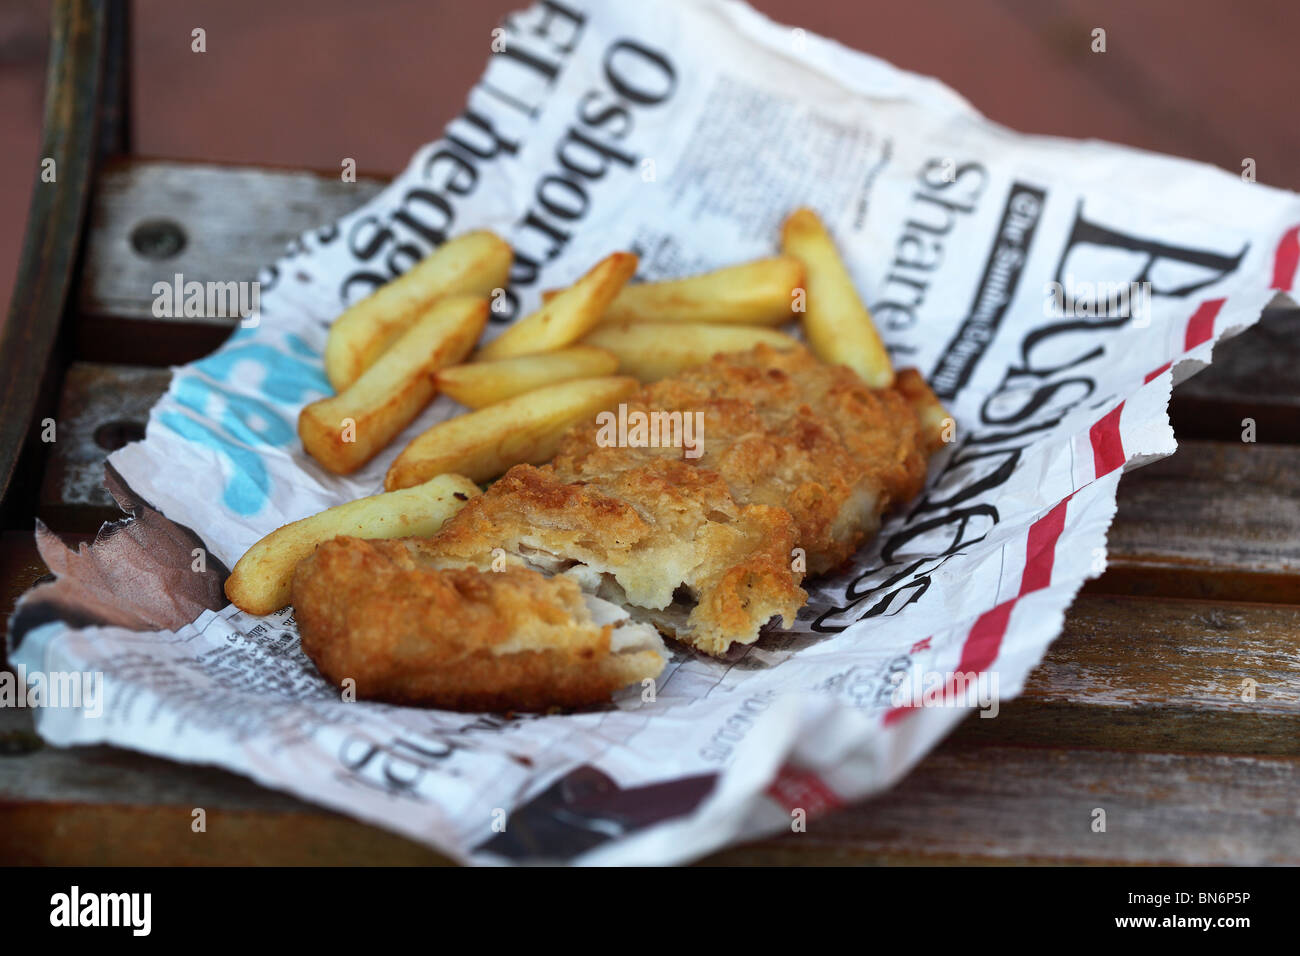 English fish chips served news paper Stock Photo - Alamy